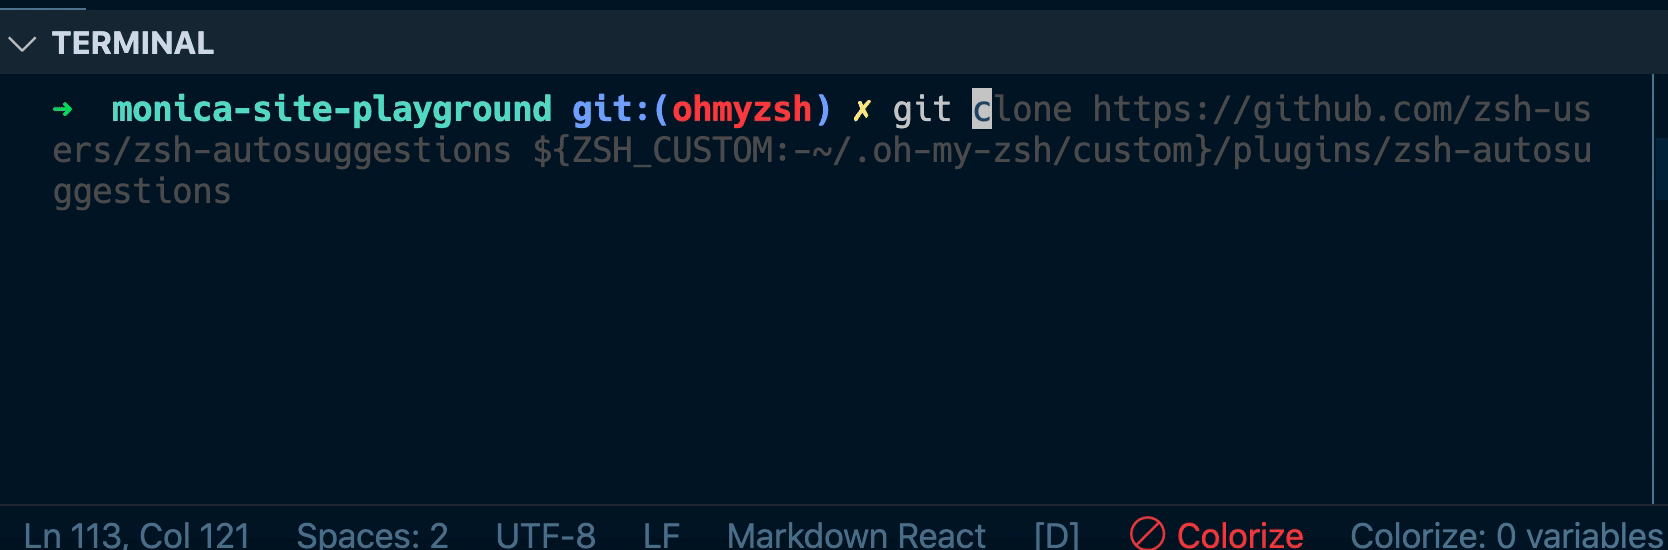 gif of the final CLI created by this tutorial